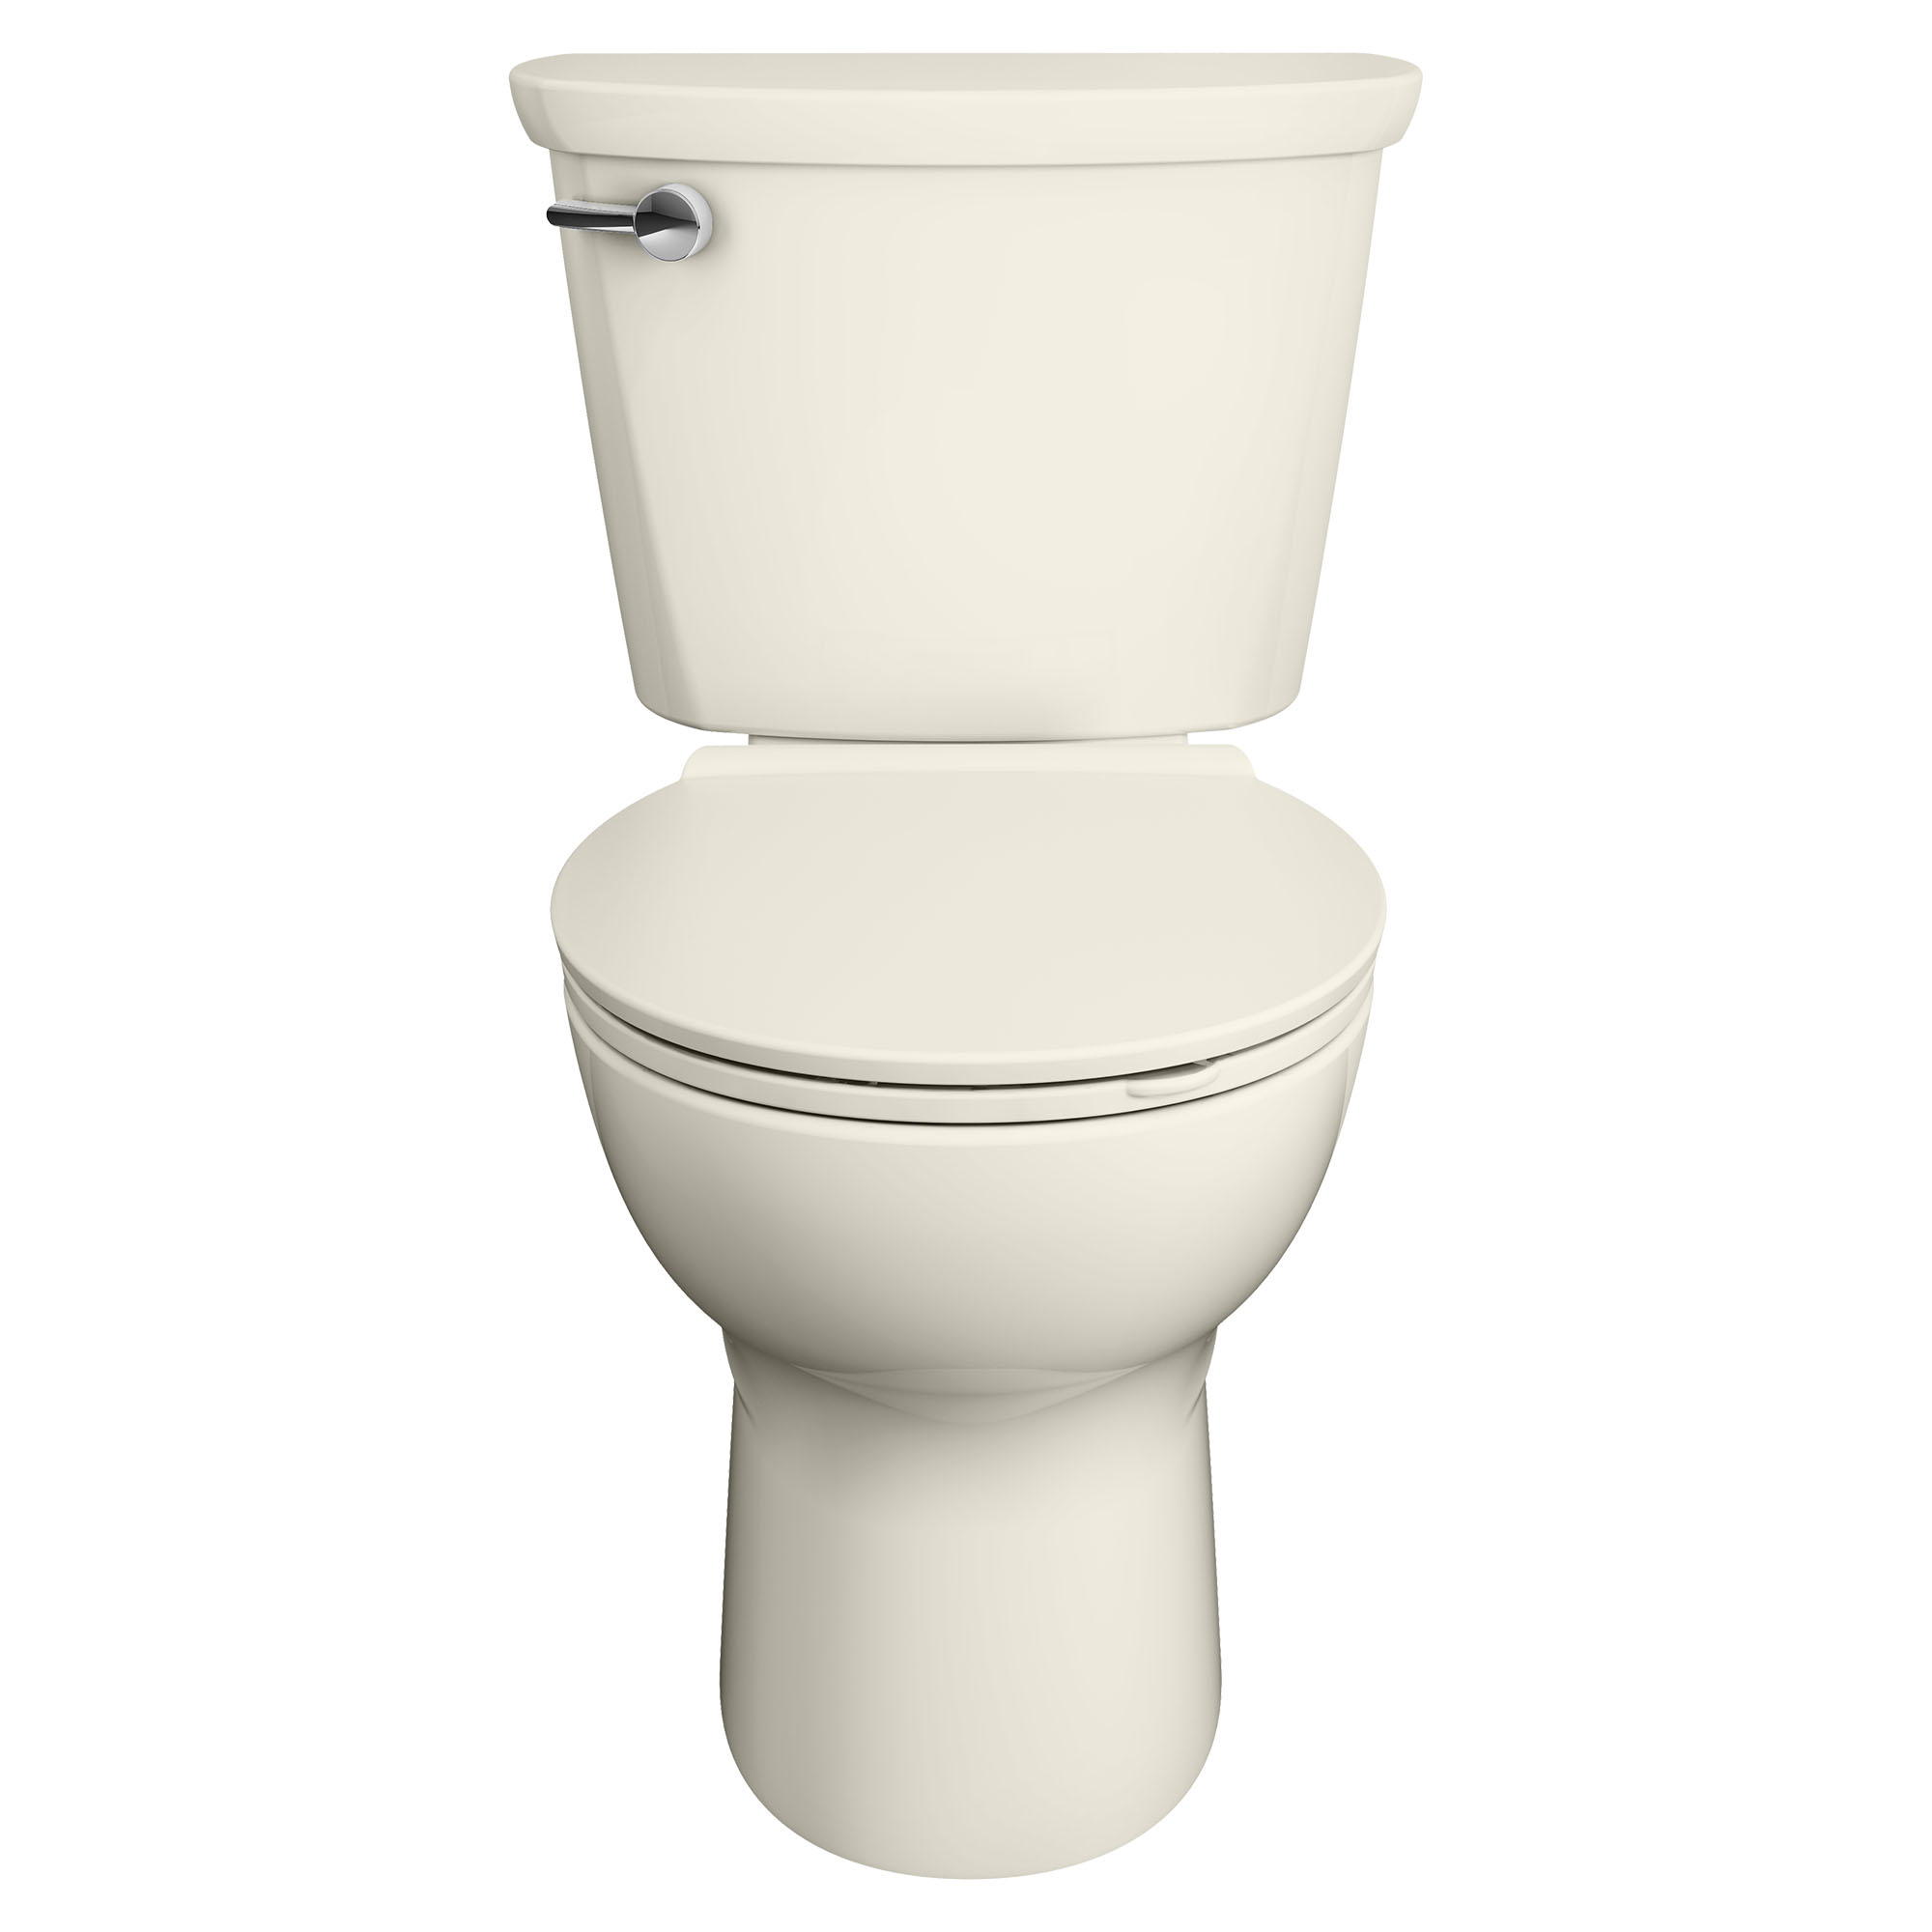 Cadet® PRO Two-Piece 1.28 gpf/4.8 Lpf Standard Height Round Front 10-Inch Rough Toilet Less Seat